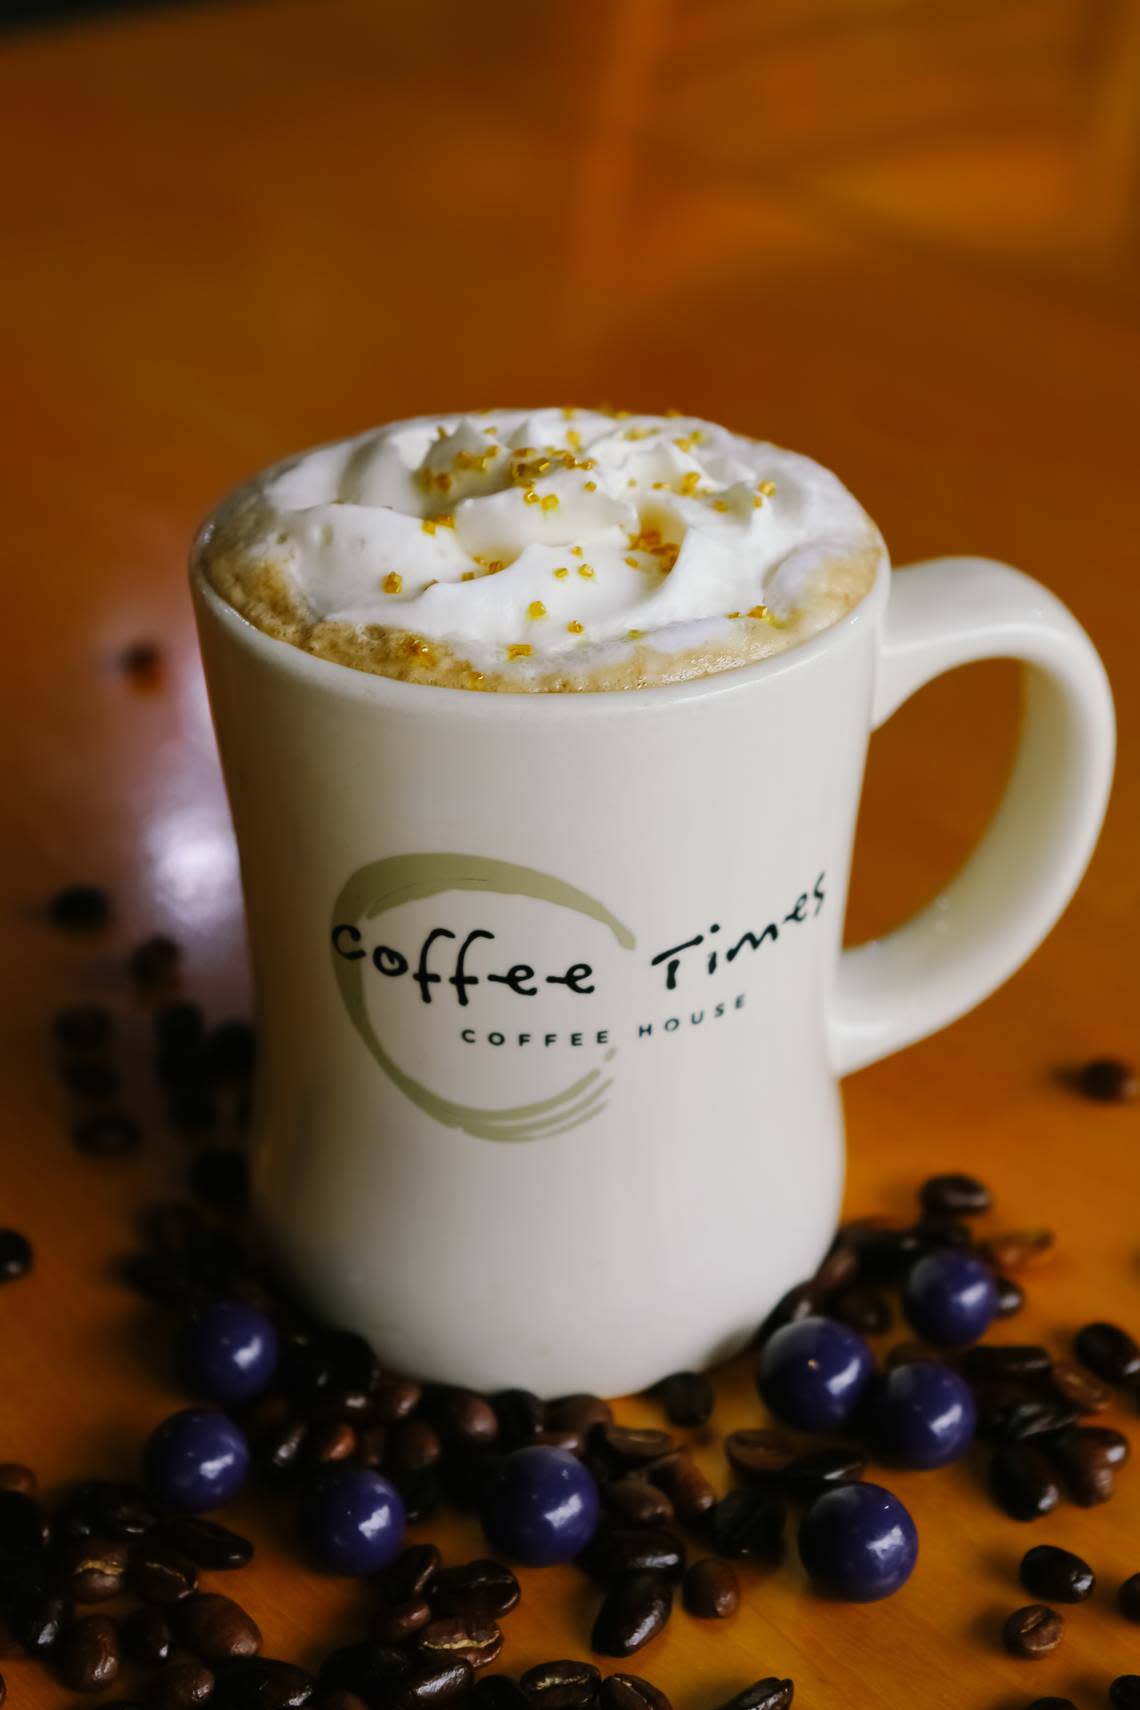 For Lexington Coffee (and Tea), Coffee Times is rolling out the Blueberry Pie a la Mode, a coffee drink with the flavors blueberries, cinnamon, brown sugar and ice cream. All the coffee week drinks are $3. Eric Novak